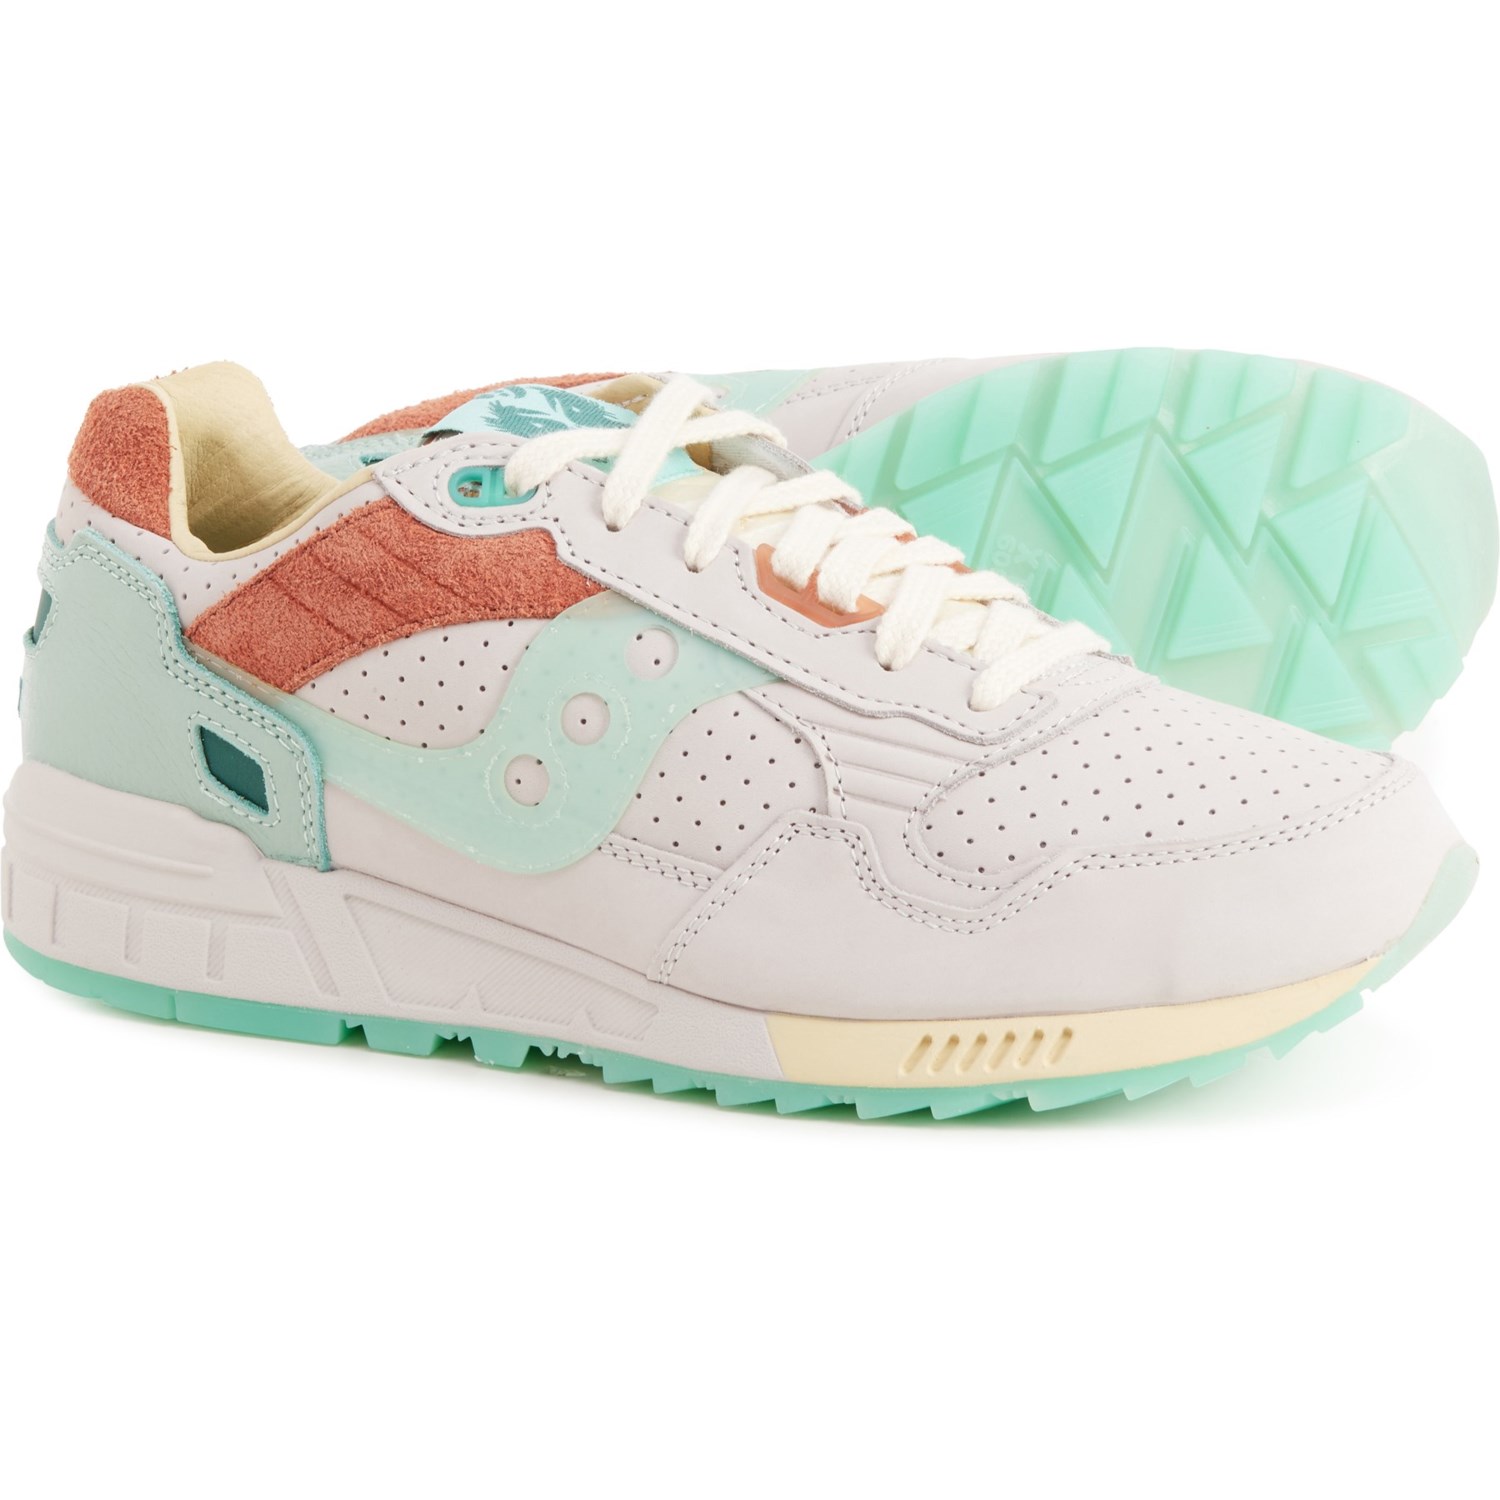 Saucony Fashion Running Shoes - Leather (Men and Women)